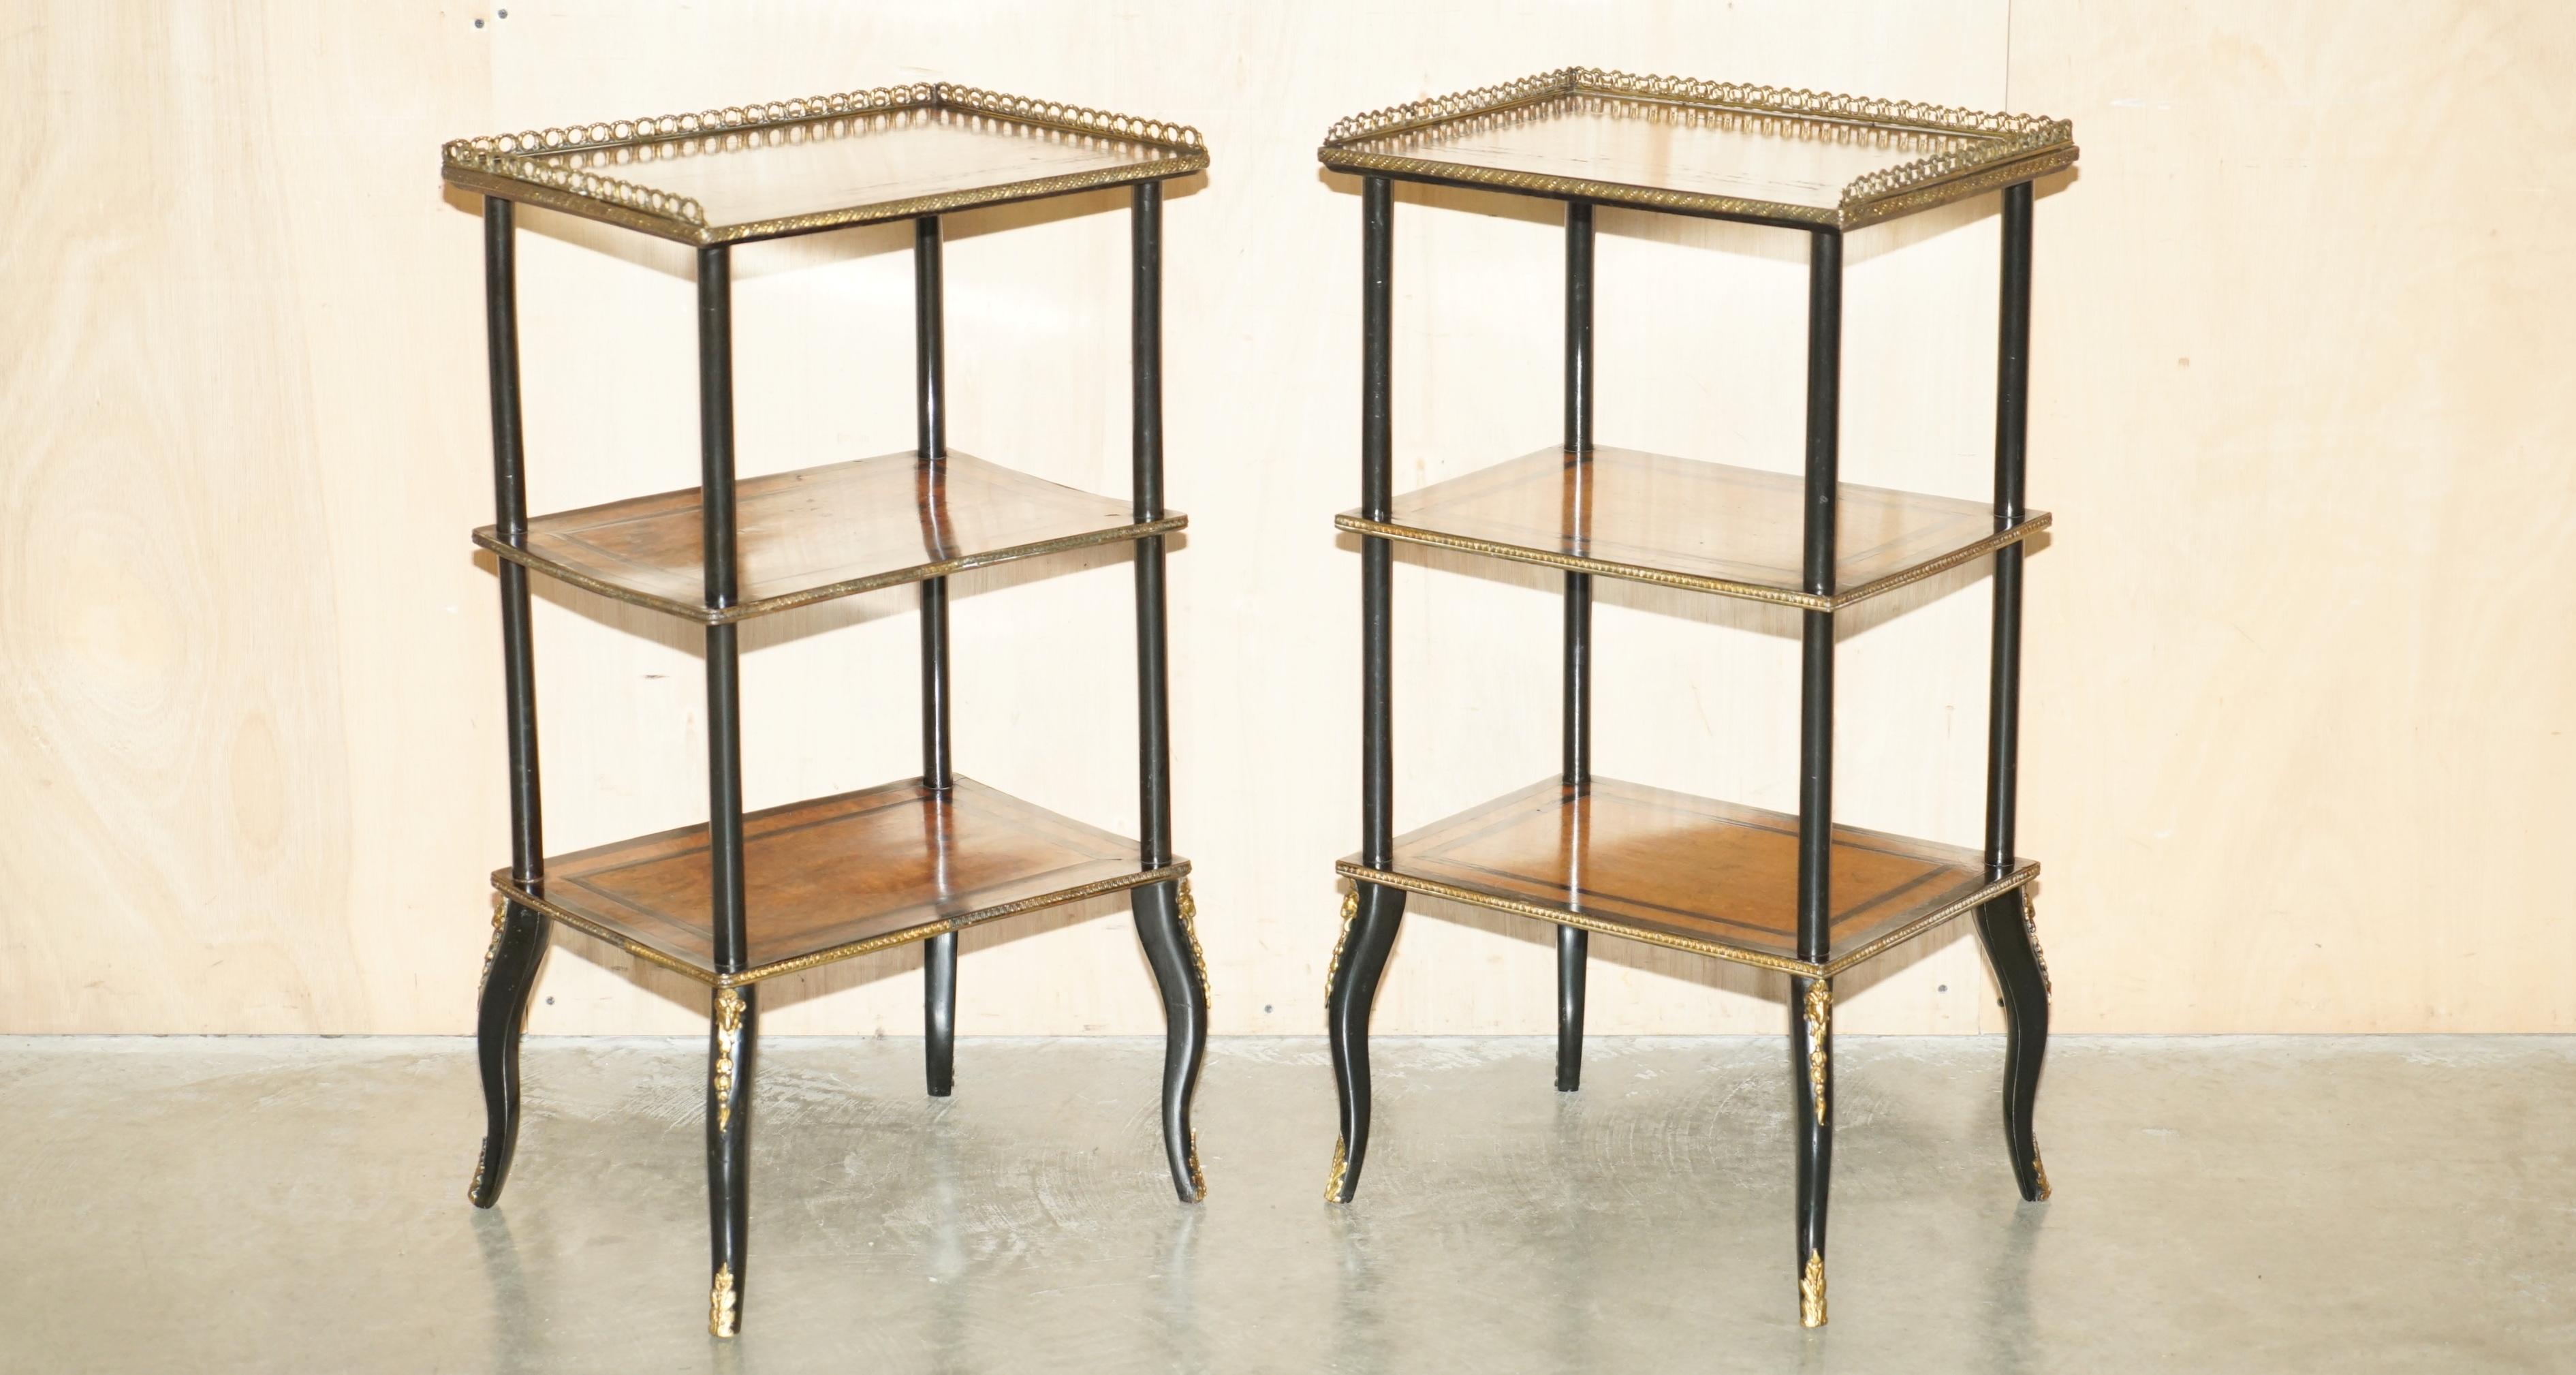 Royal House Antiques

Royal House Antiques is delighted to offer for sale this stunning pair of Antique Victorian Ebonised Amboyna wood Etageres with gilt brass gallery rails 

Please note the delivery fee listed is just a guide, it covers within